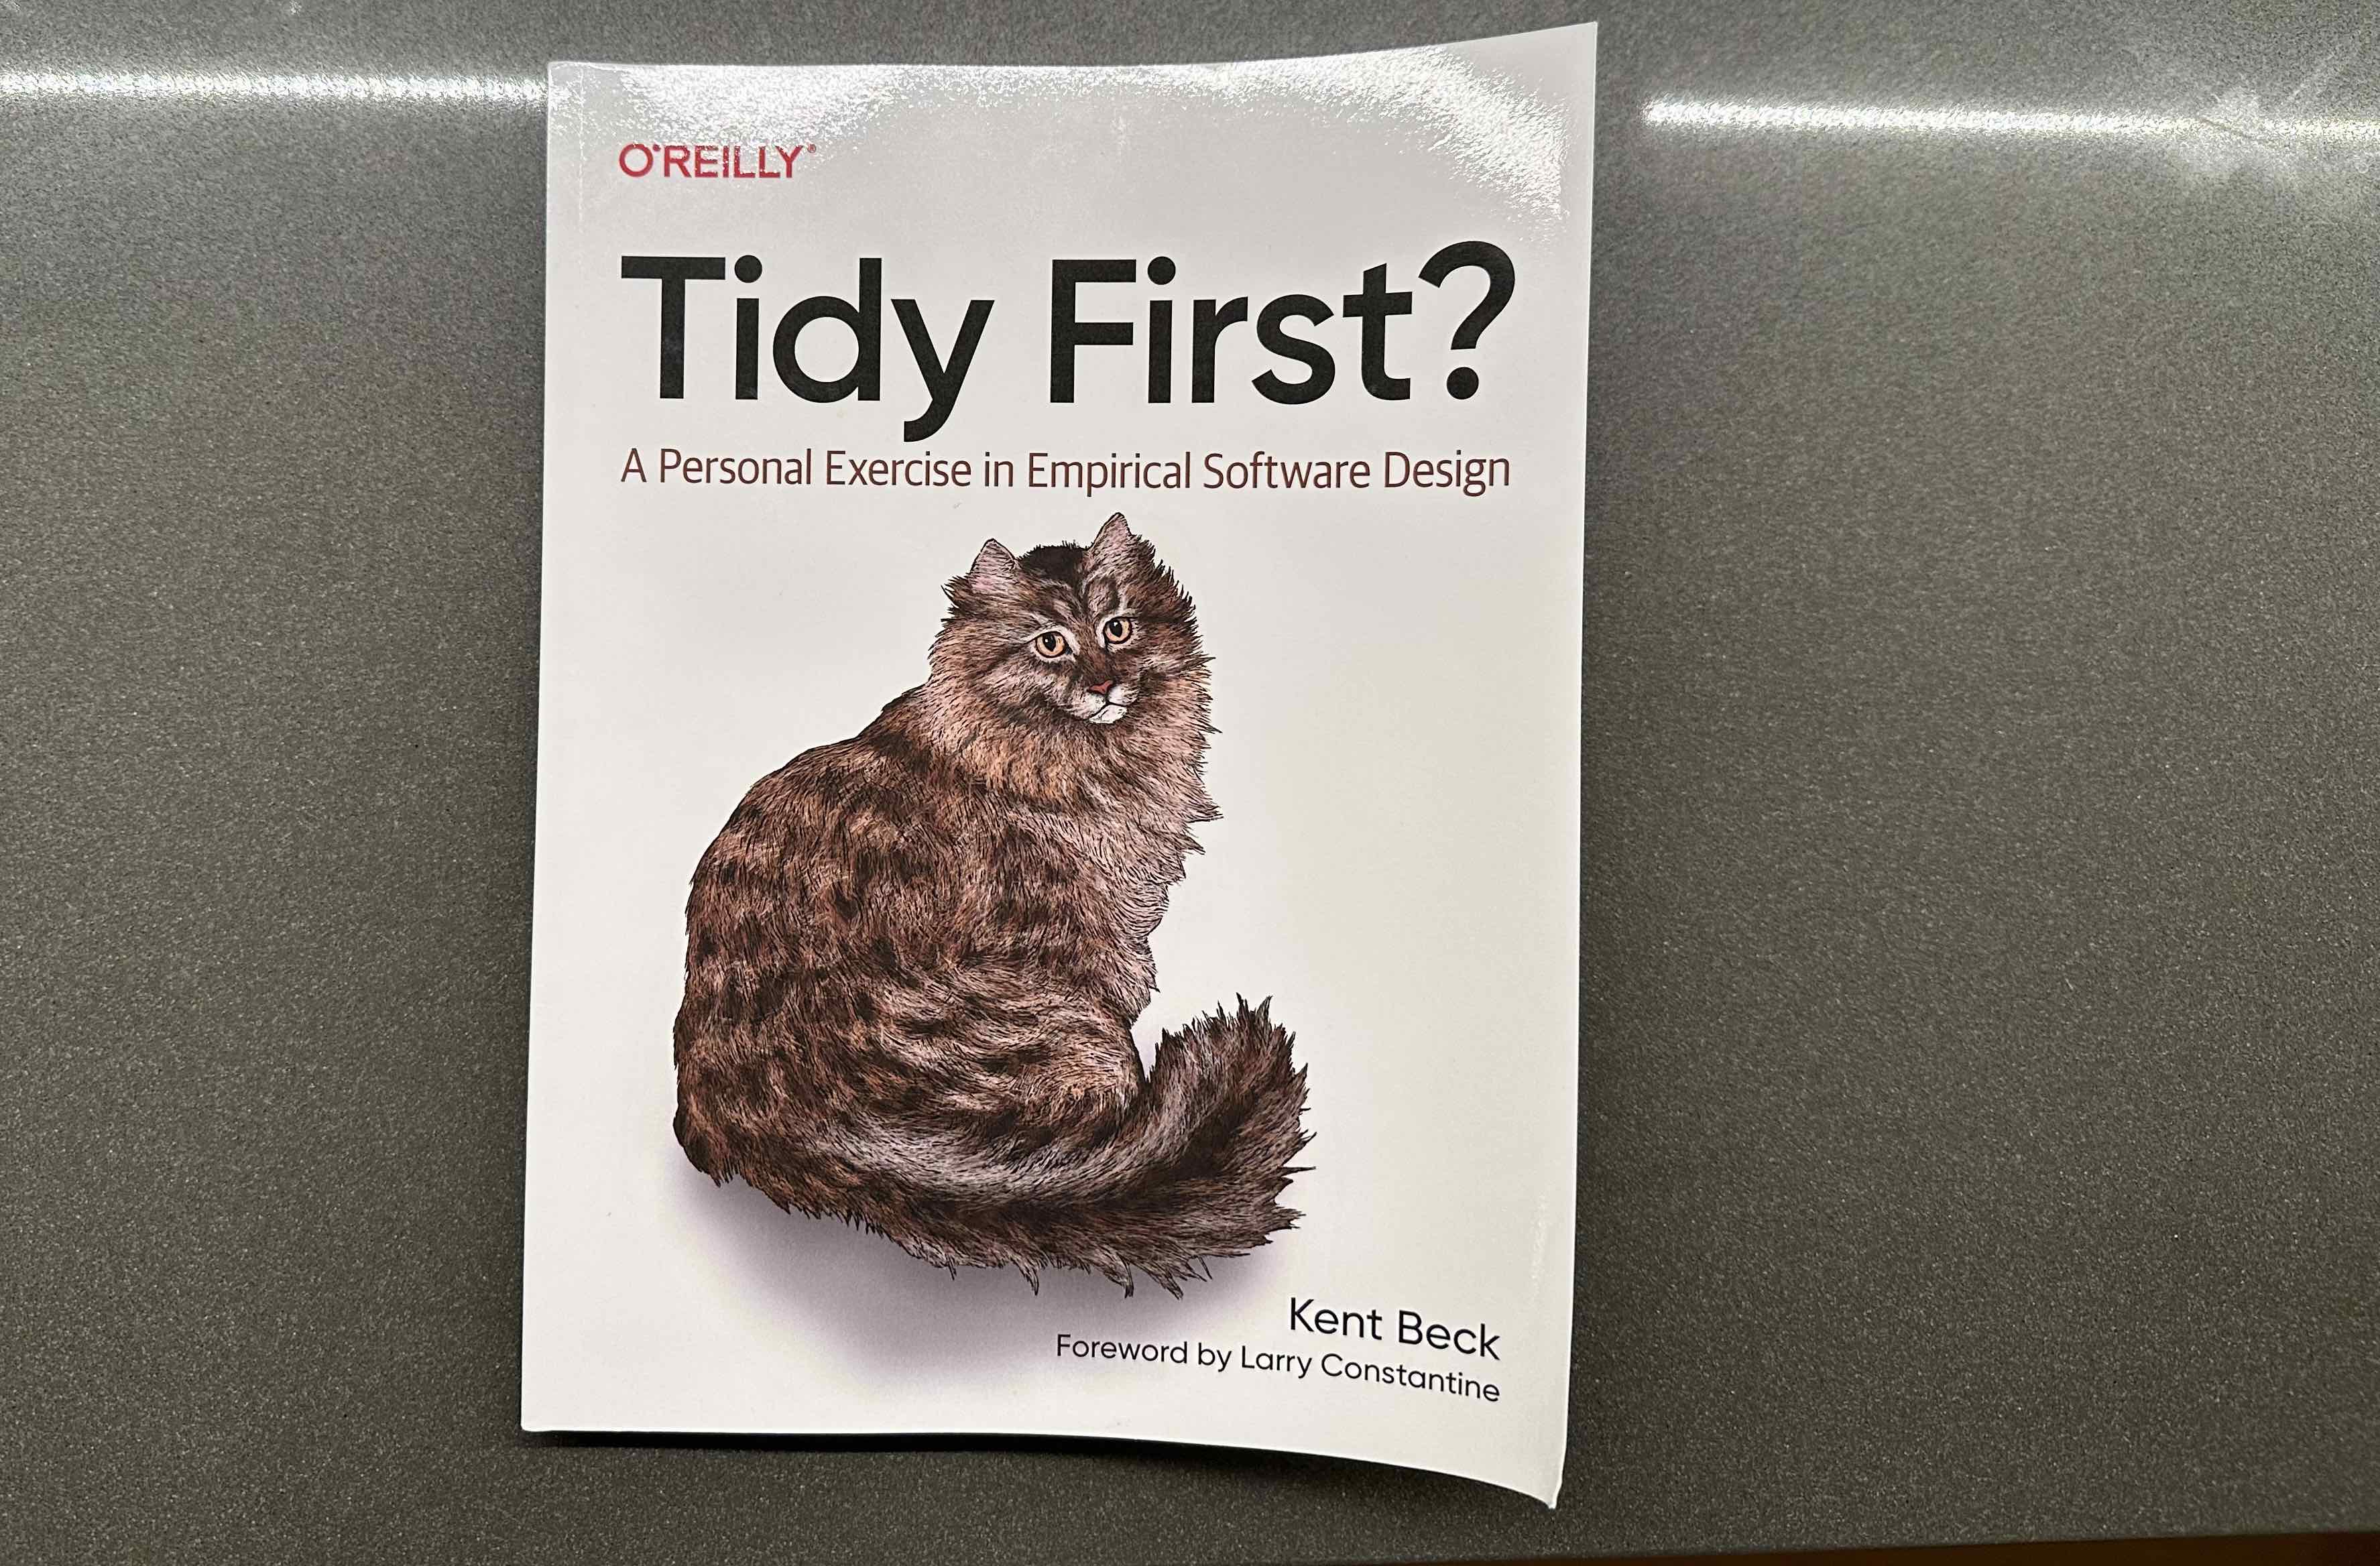 Tidy First? by Kent Beck captures the spirit of Ousterhout’s A Philosophy of Software Design while also recognizing the inherent tensions of dev